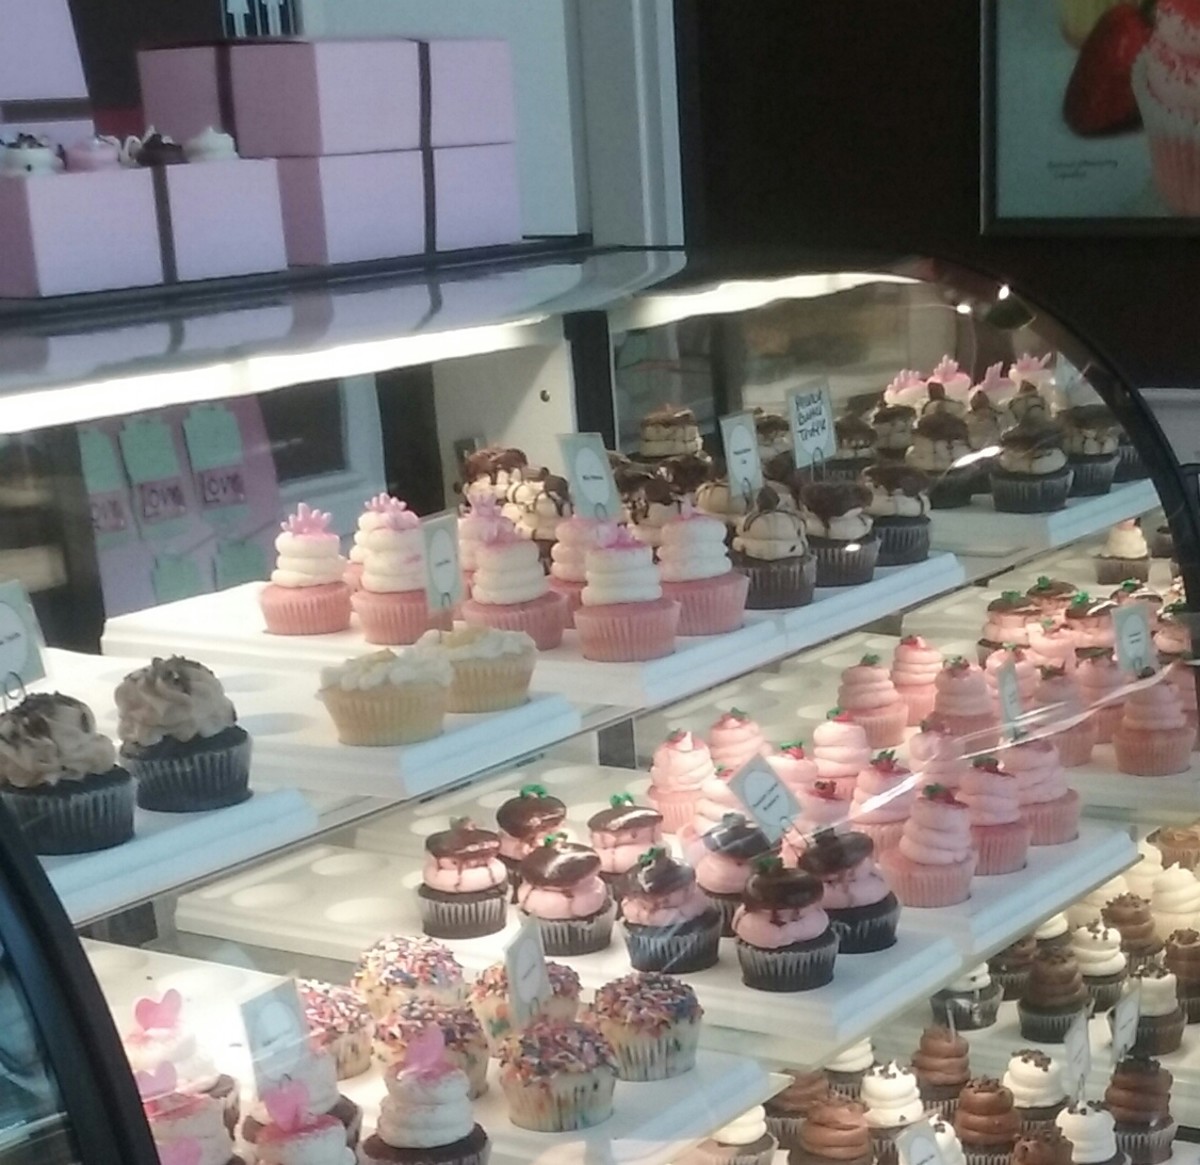 A pretty array of nicely decorated cupcakes at Gigi's Cupcakes